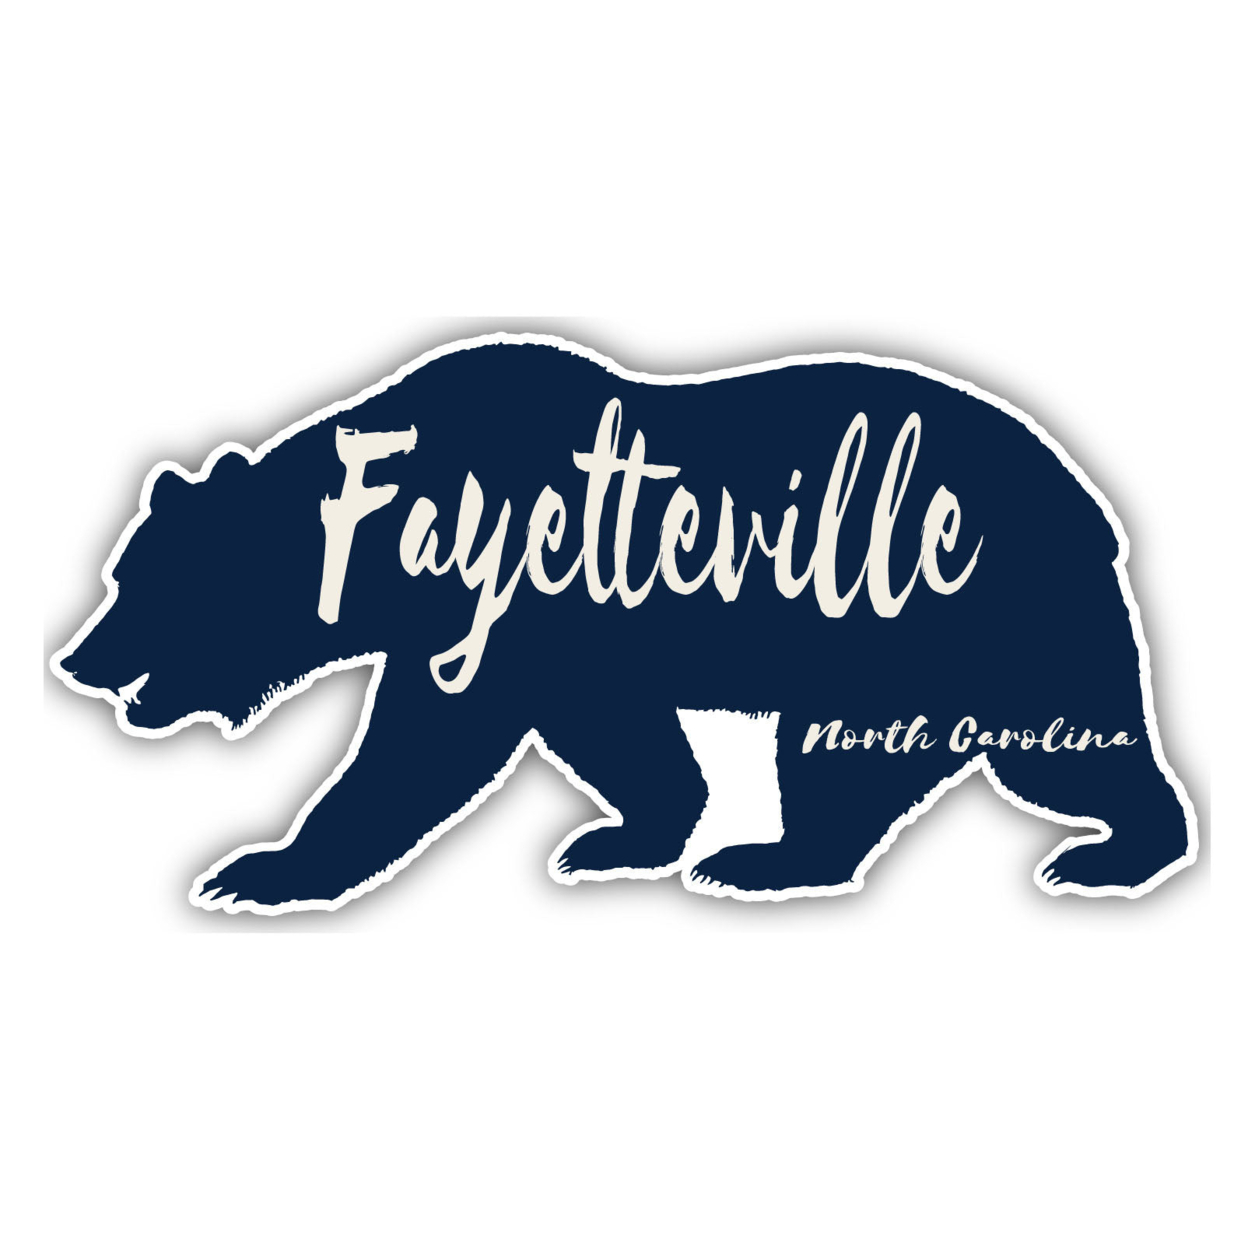 Fayetteville North Carolina Souvenir Decorative Stickers (Choose Theme And Size) - 4-Pack, 12-Inch, Tent